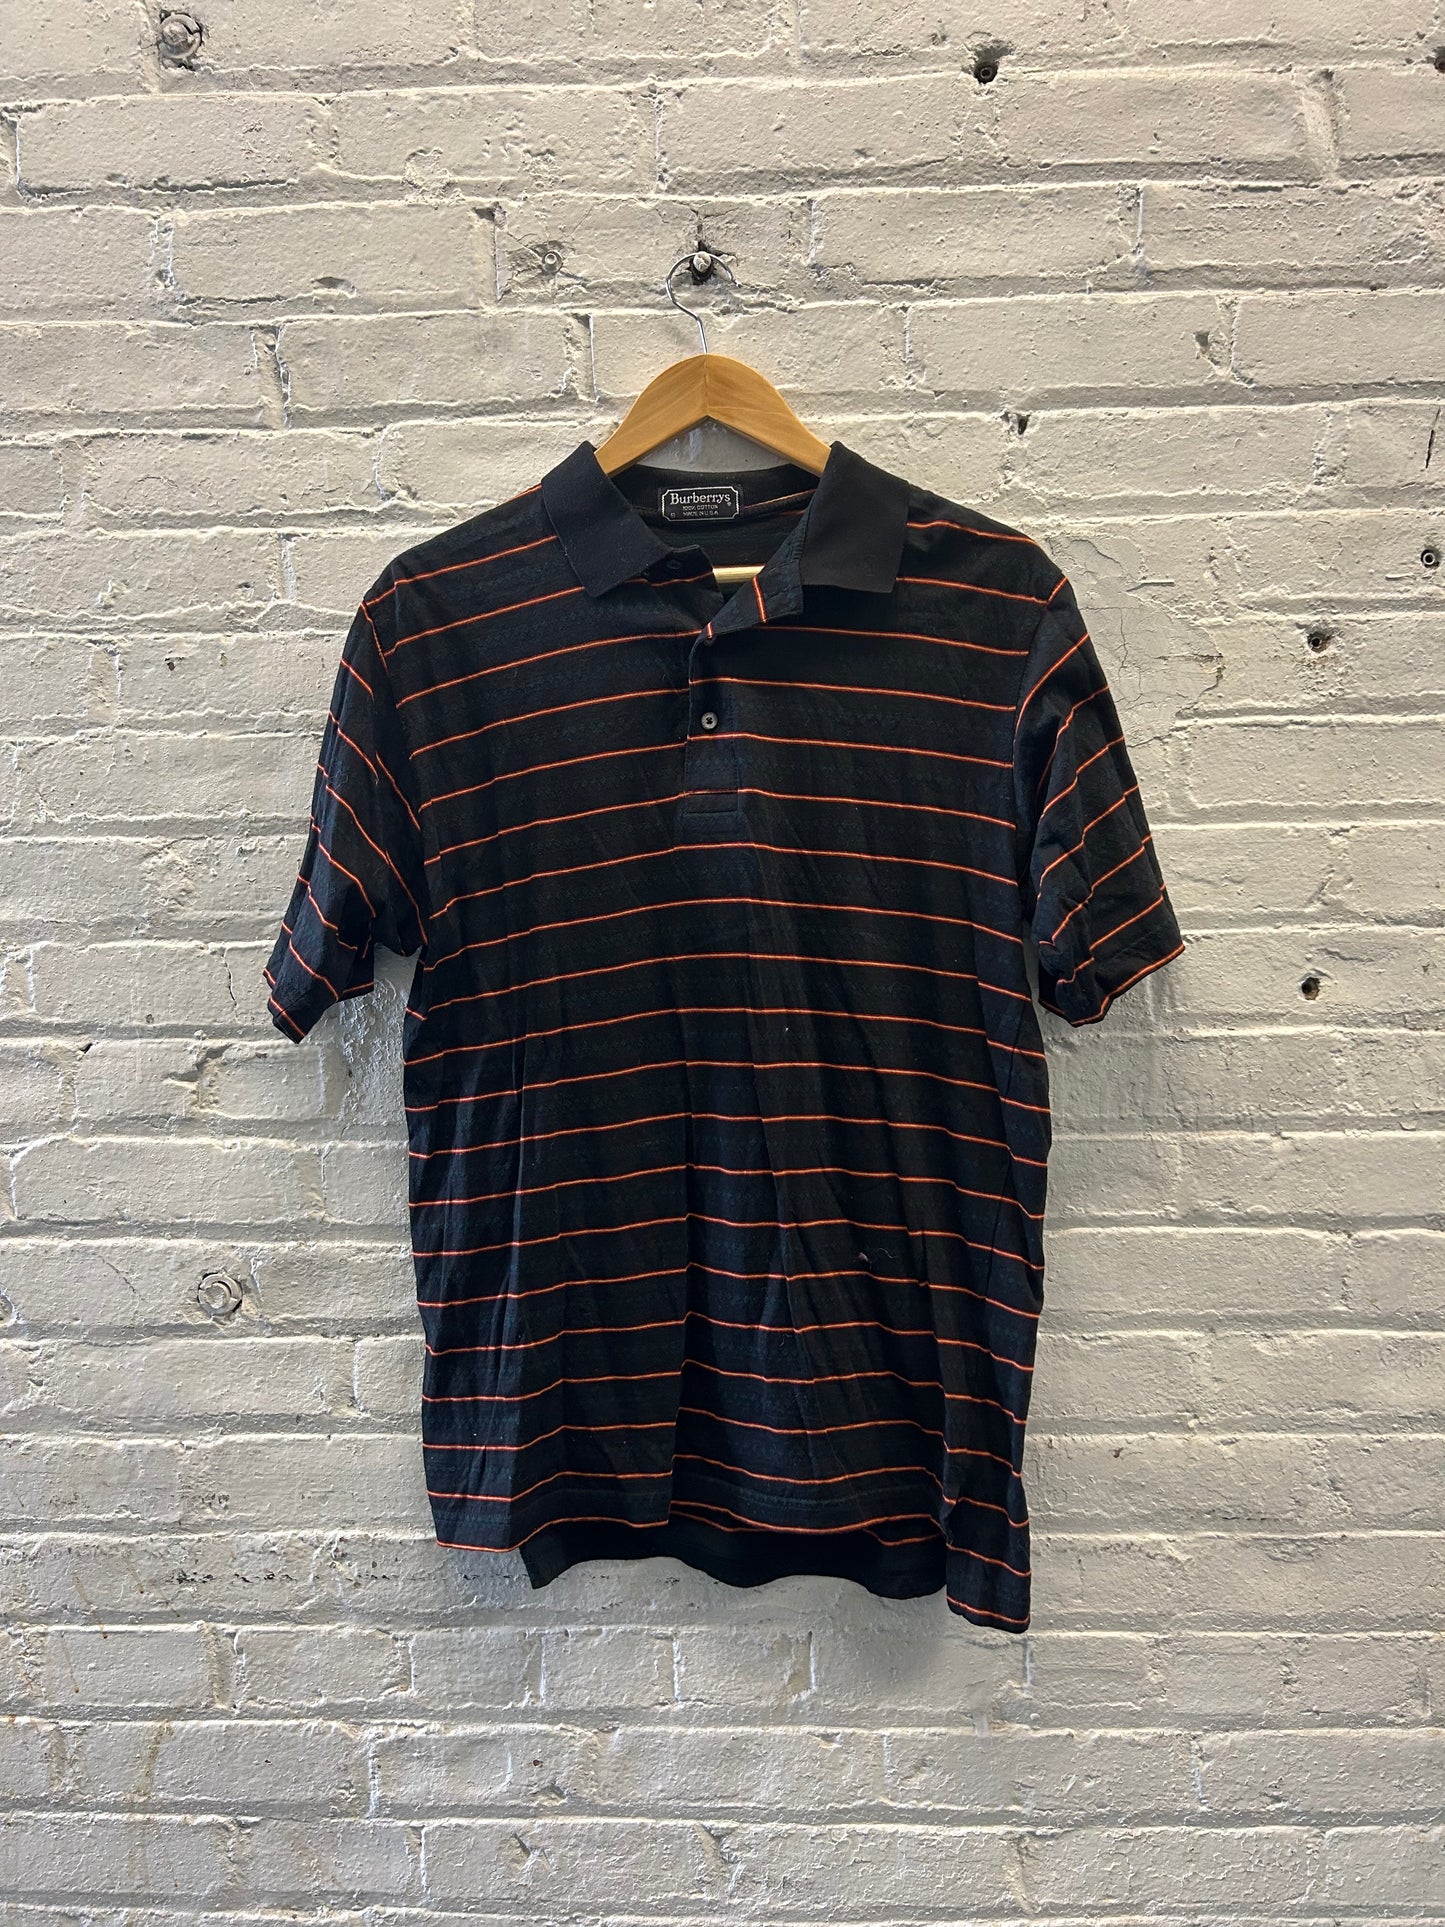 Burberry's Black and Orange Striped Polo - Large